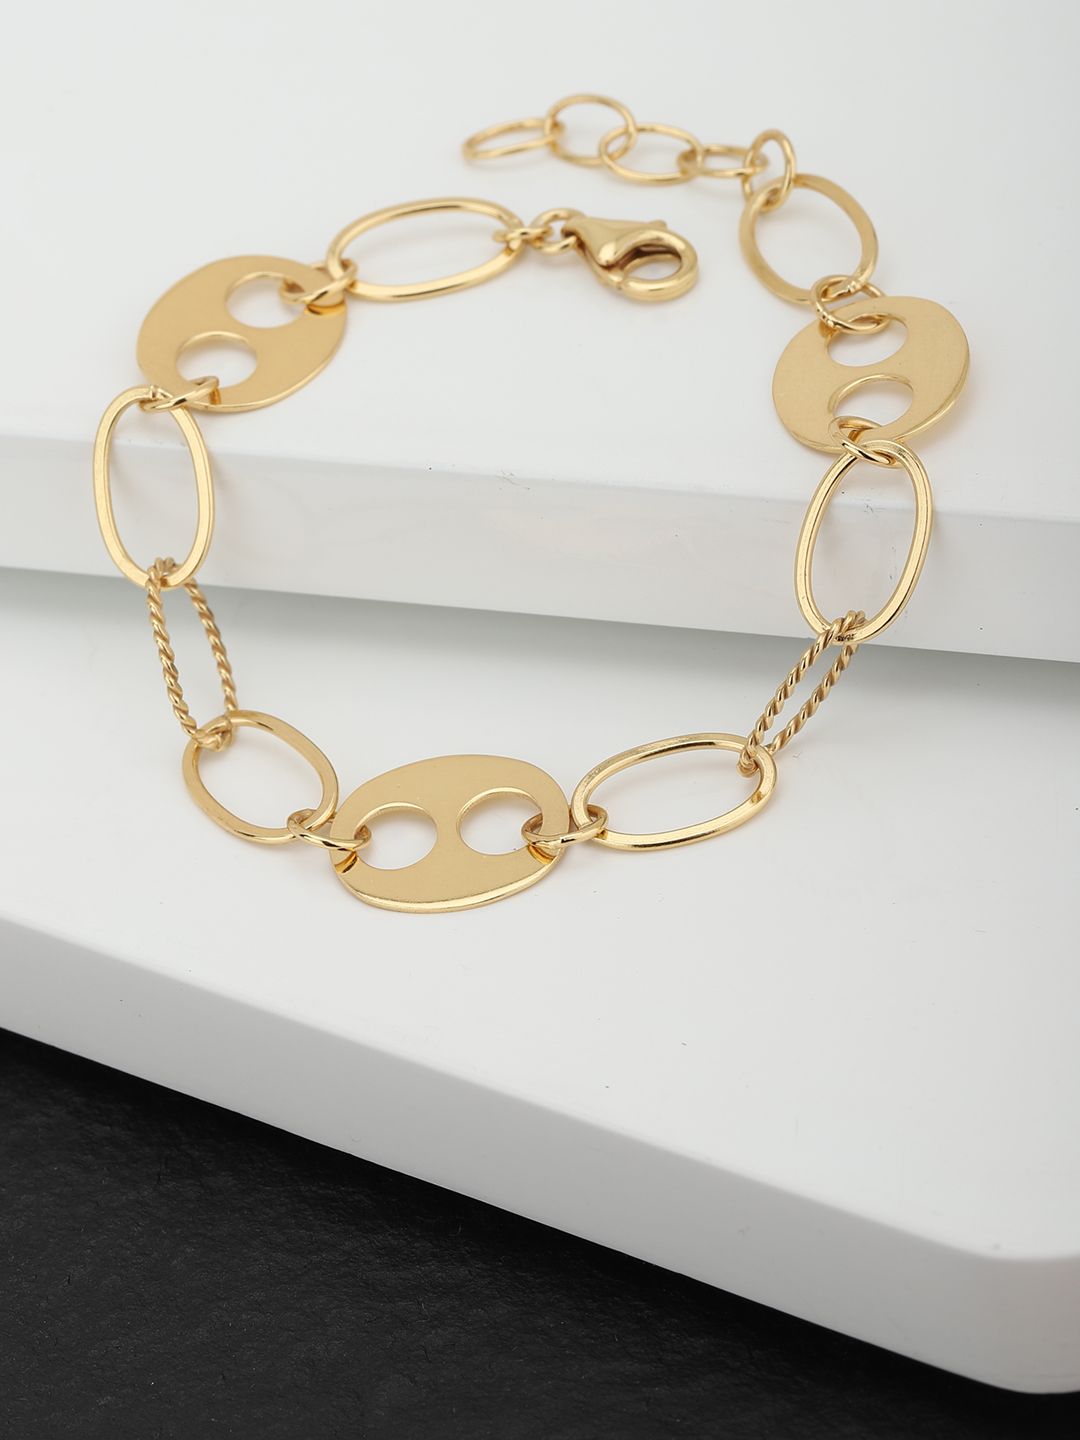 Carlton London Gold-Plated Link Bracelet Price in India